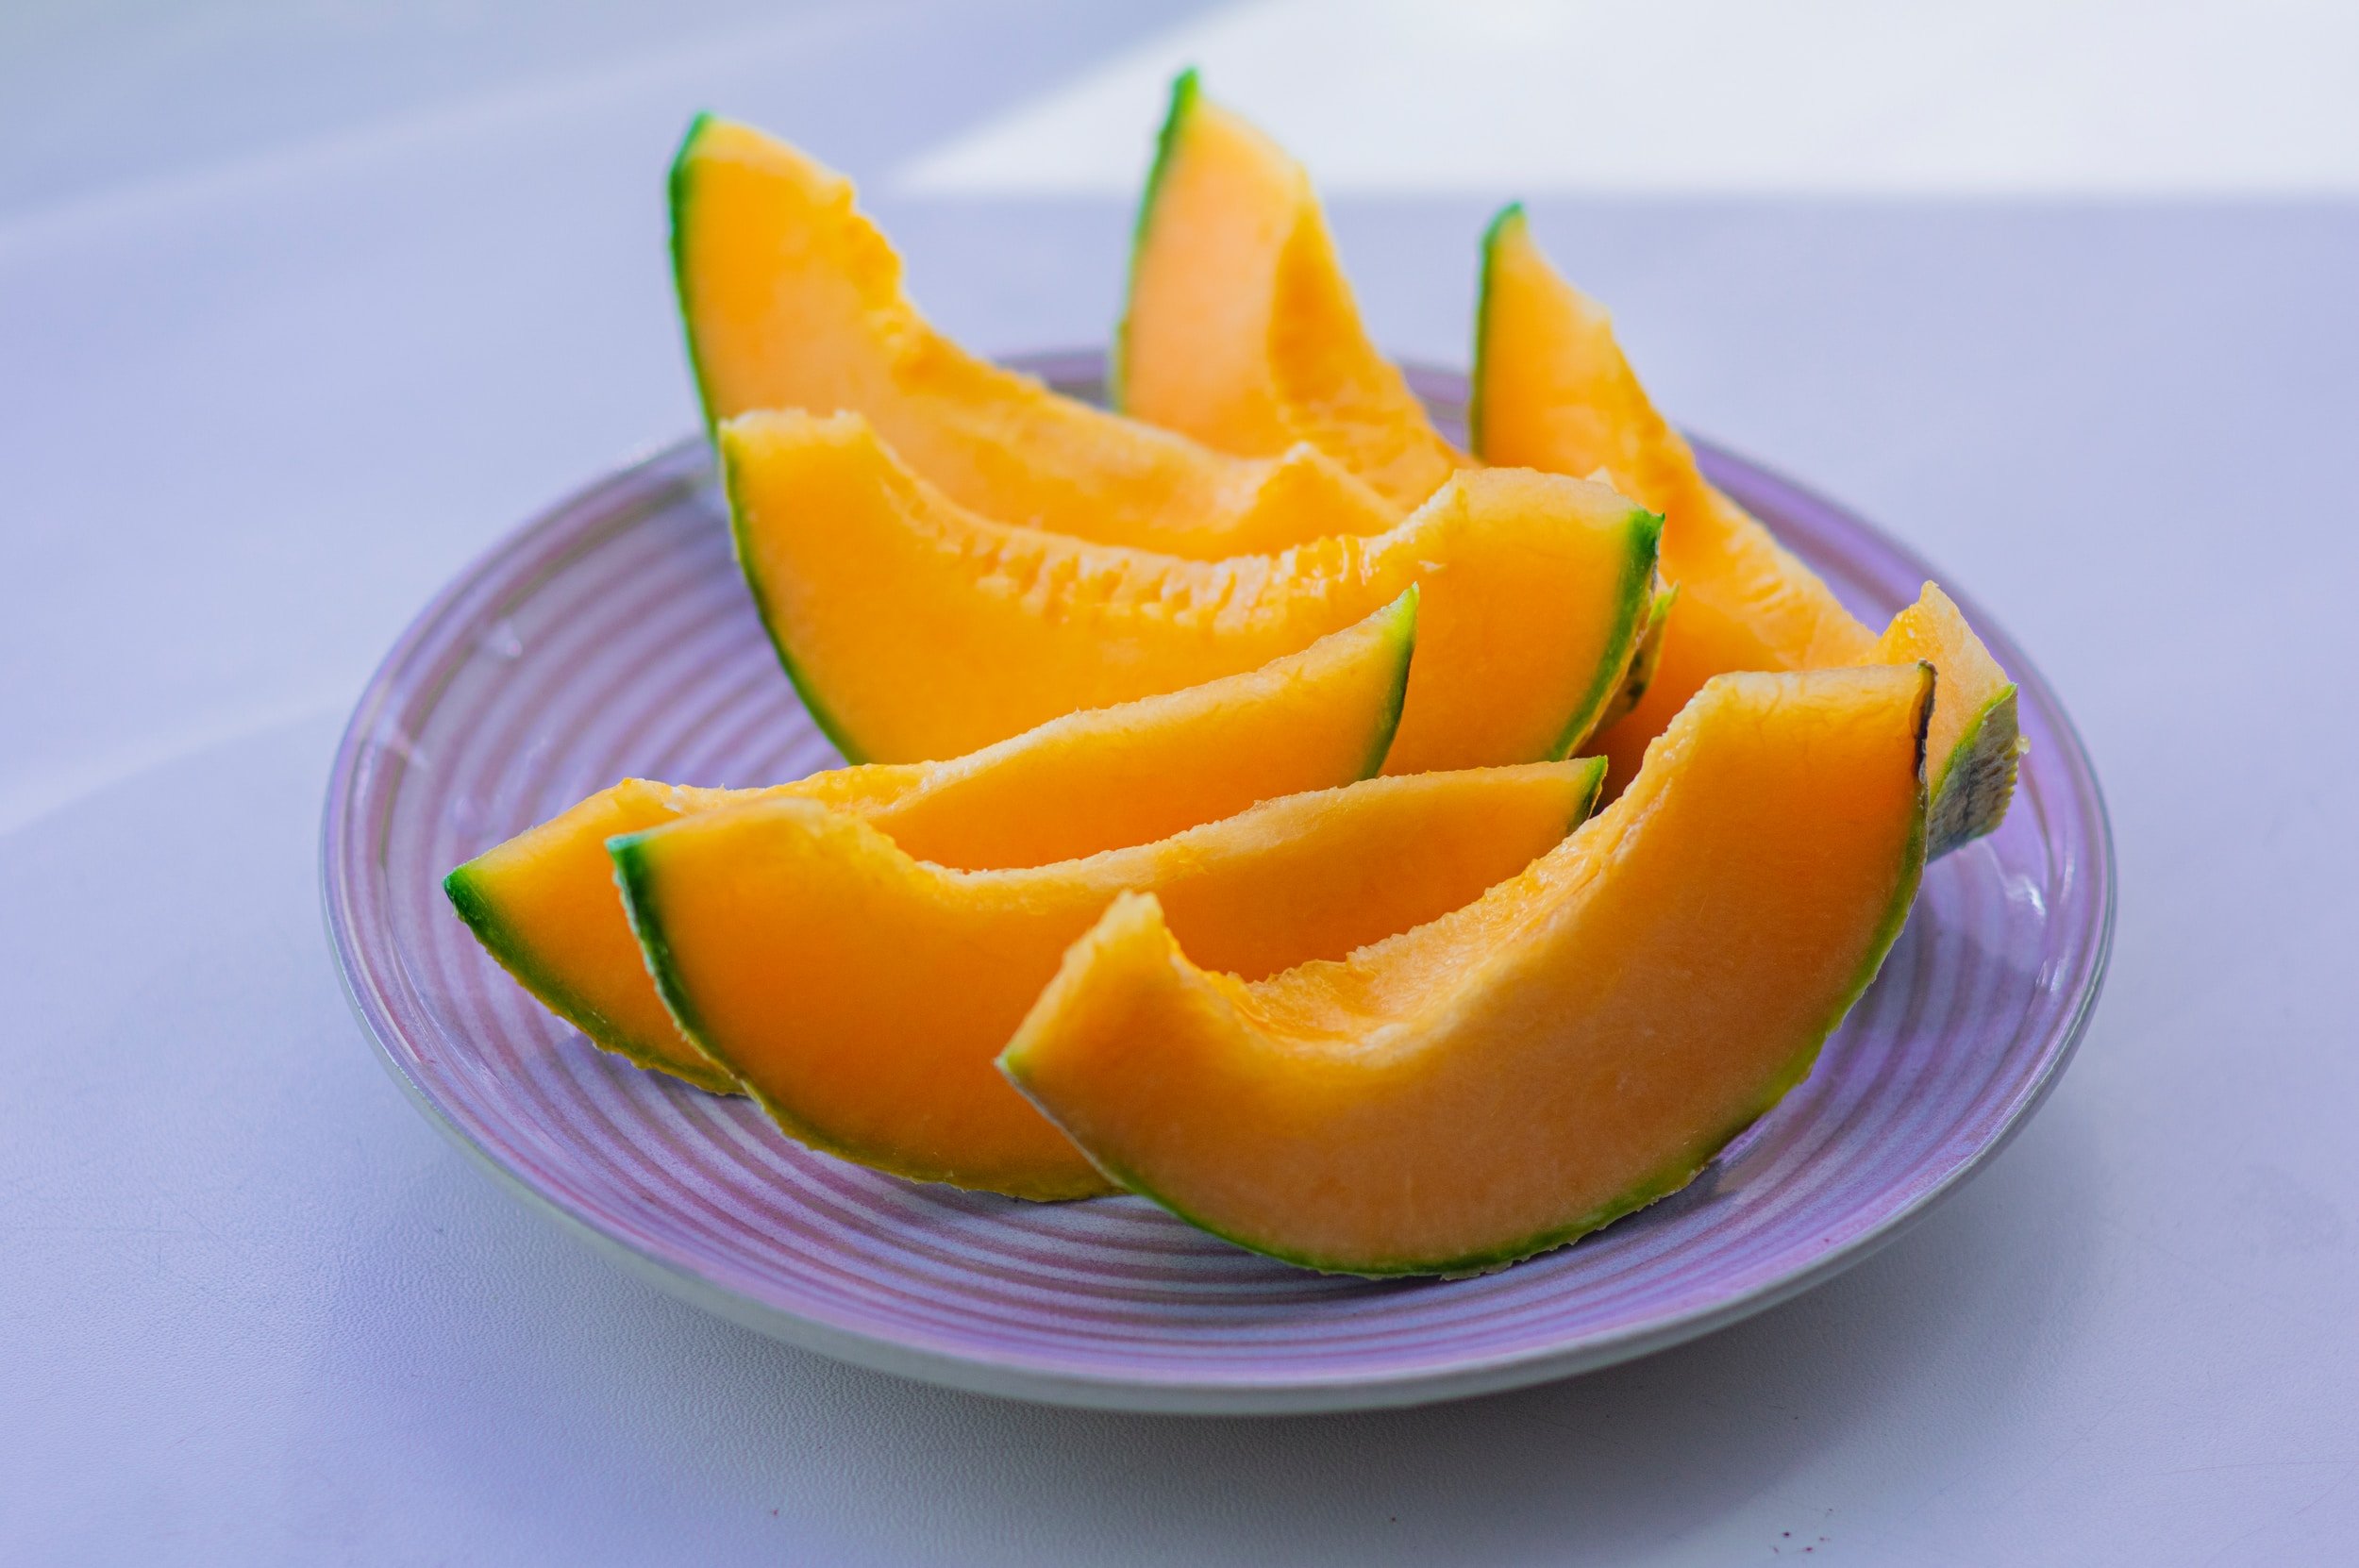 Melon for weight loss